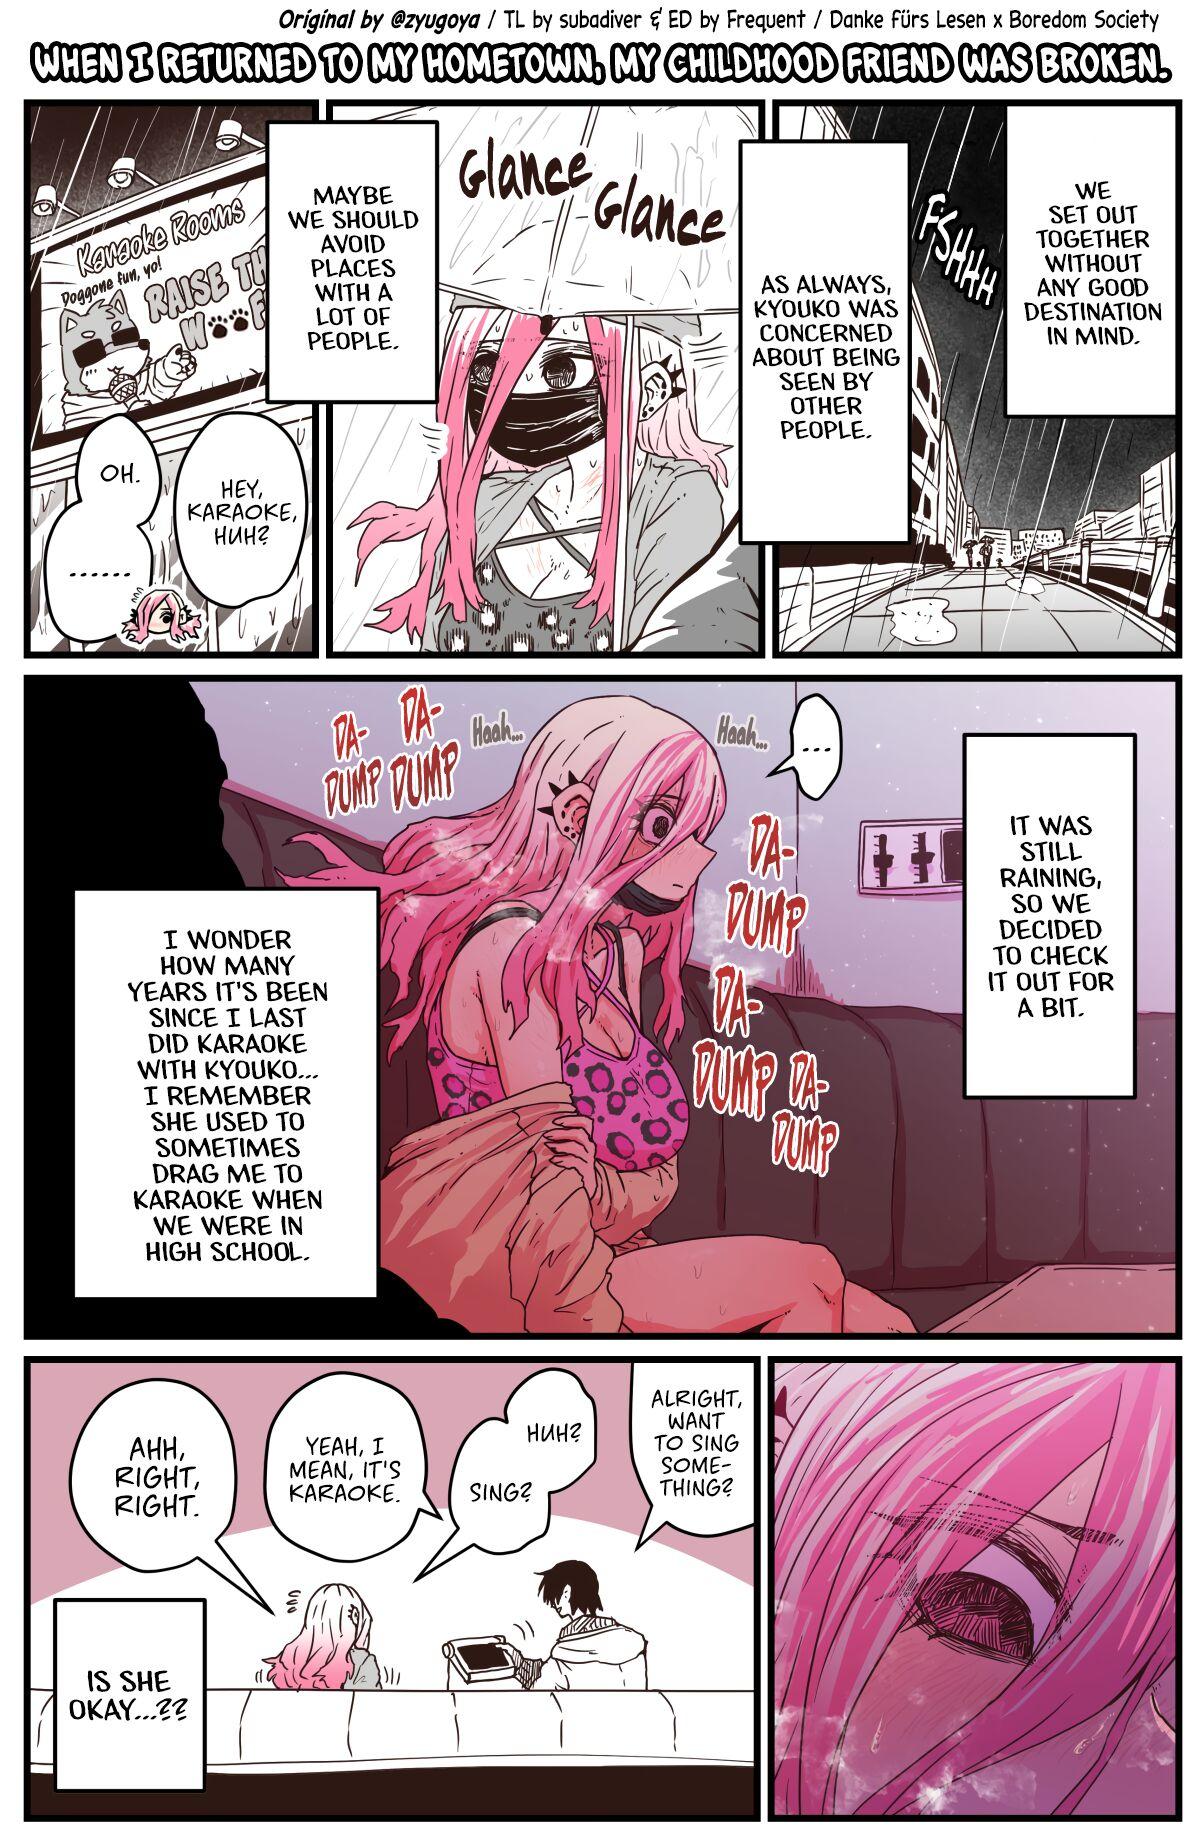 Mmf When I Returned to My Hometown, My Childhood Friend was Broken - Original Amatoriale - Page 8